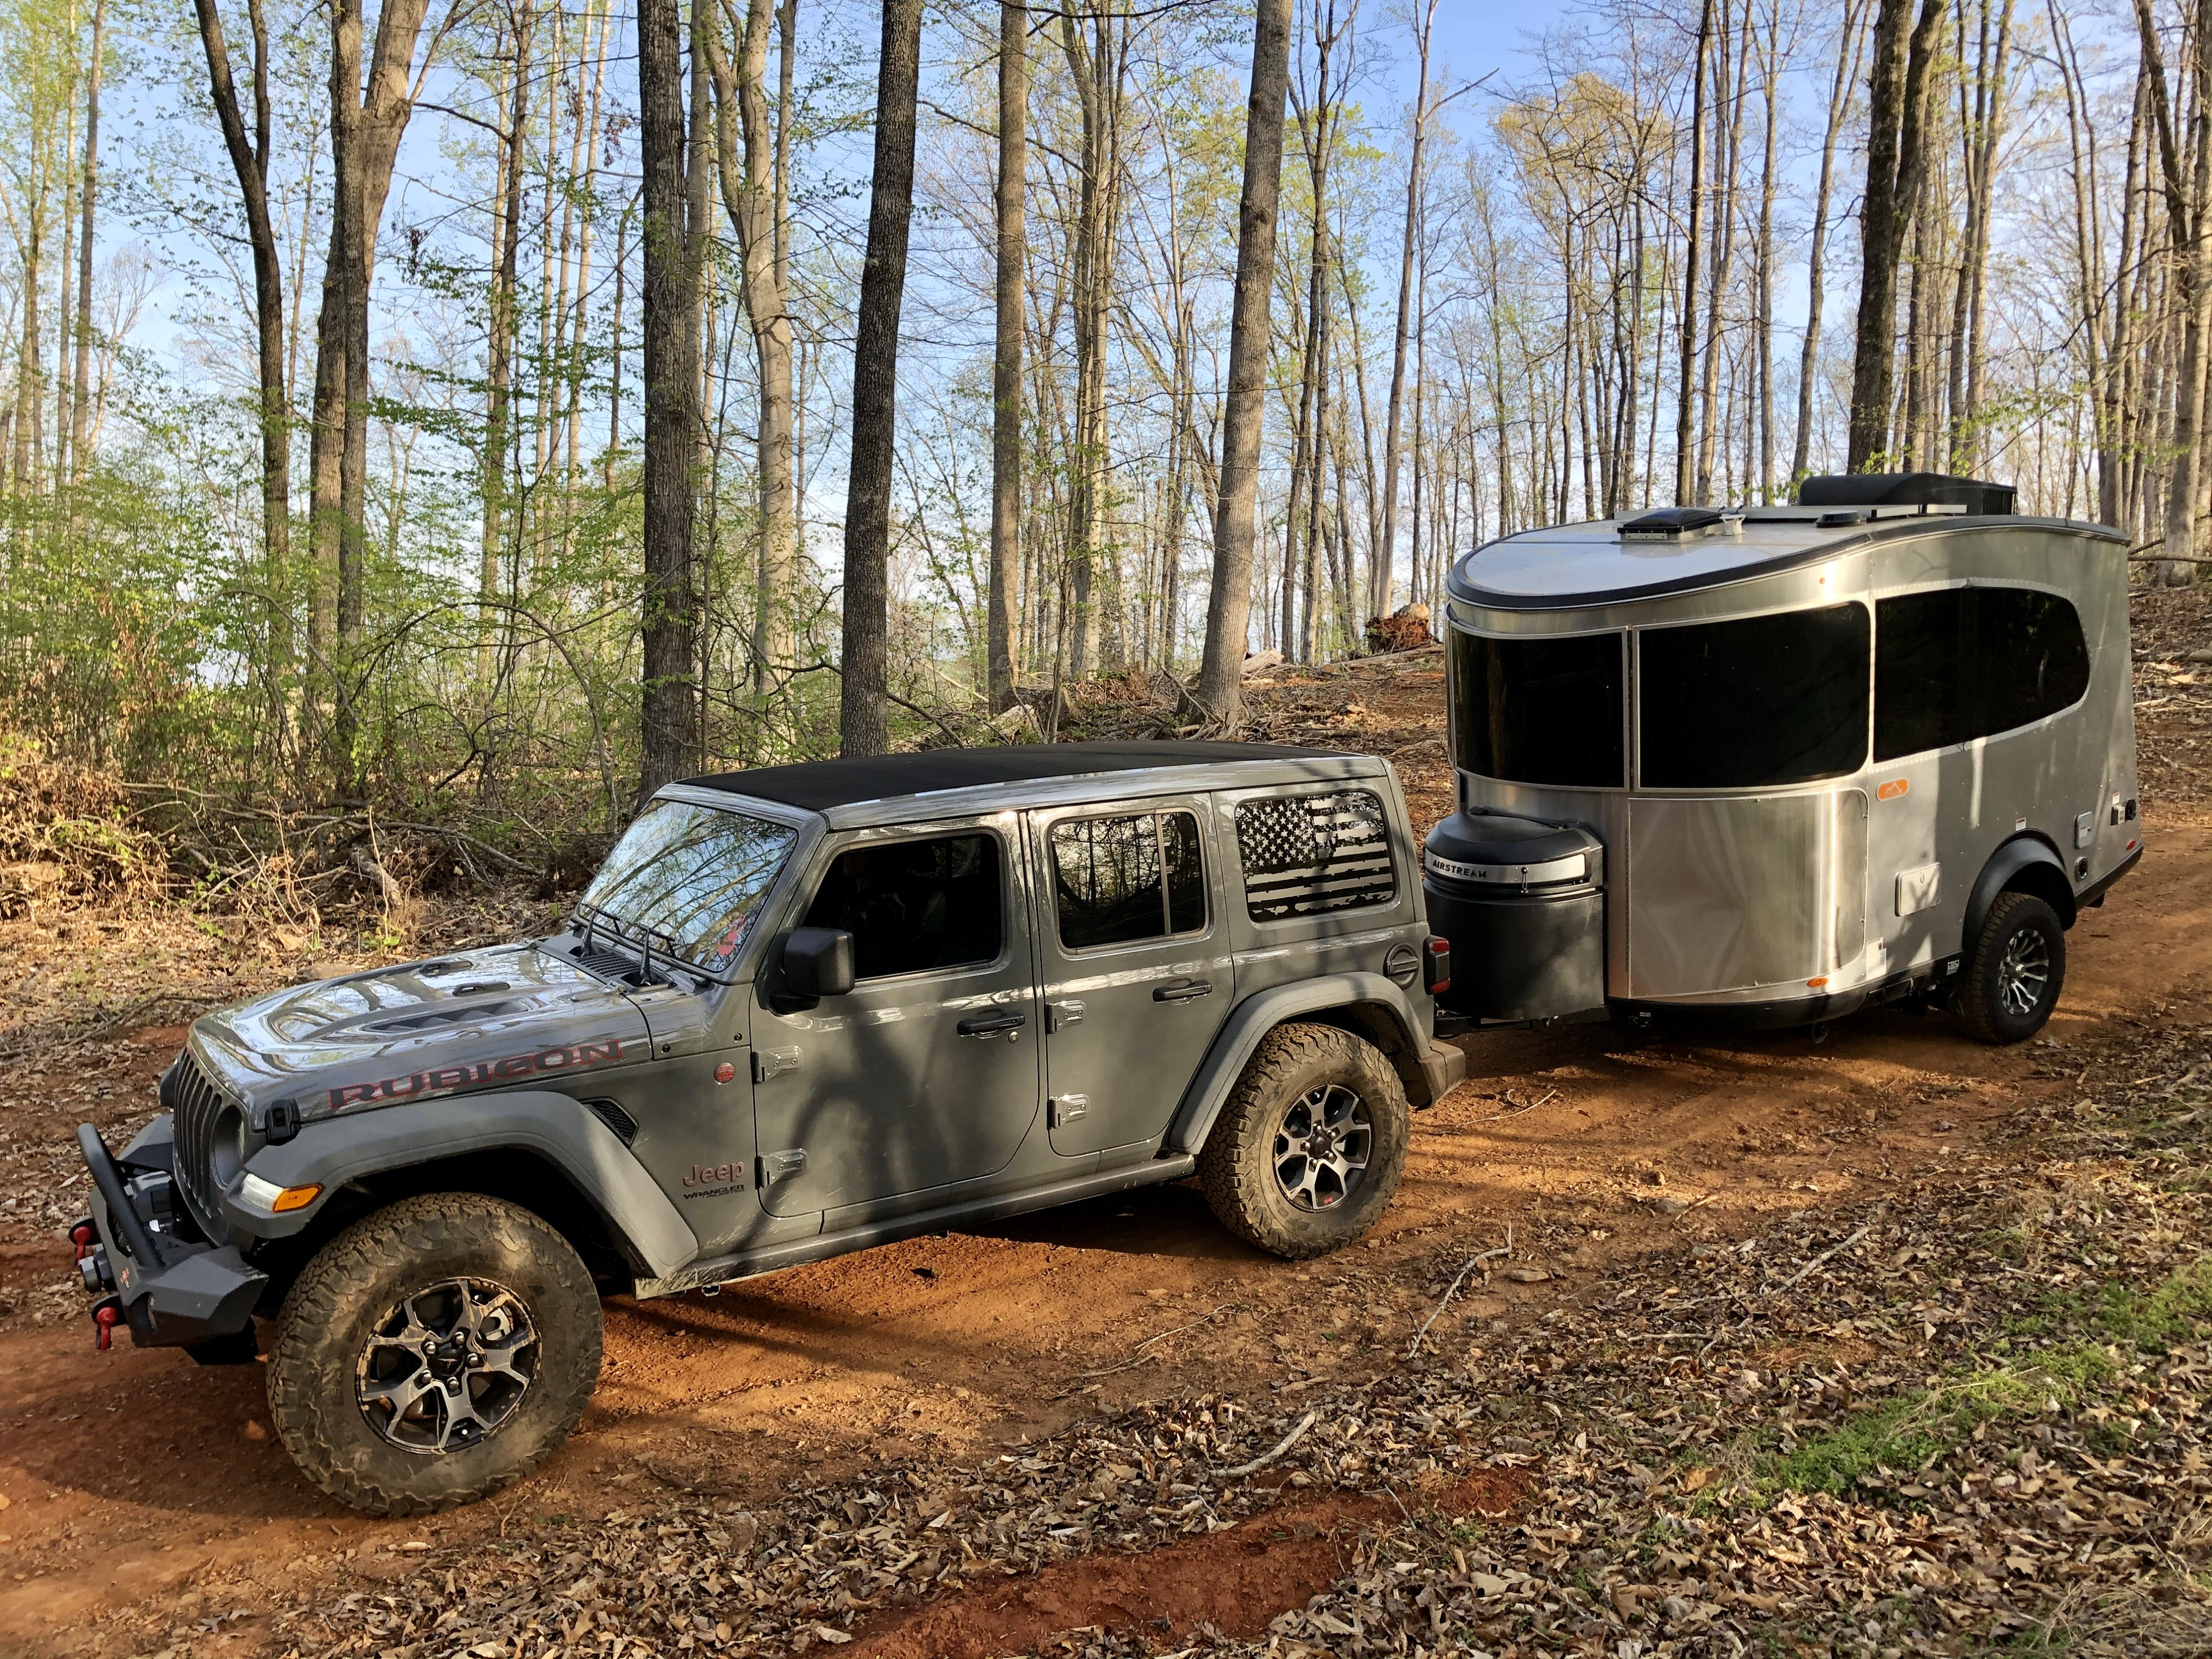 Reviews | 2020 Airstream Other Travel trailer Rental in Wilmington, NC |  Outdoorsy